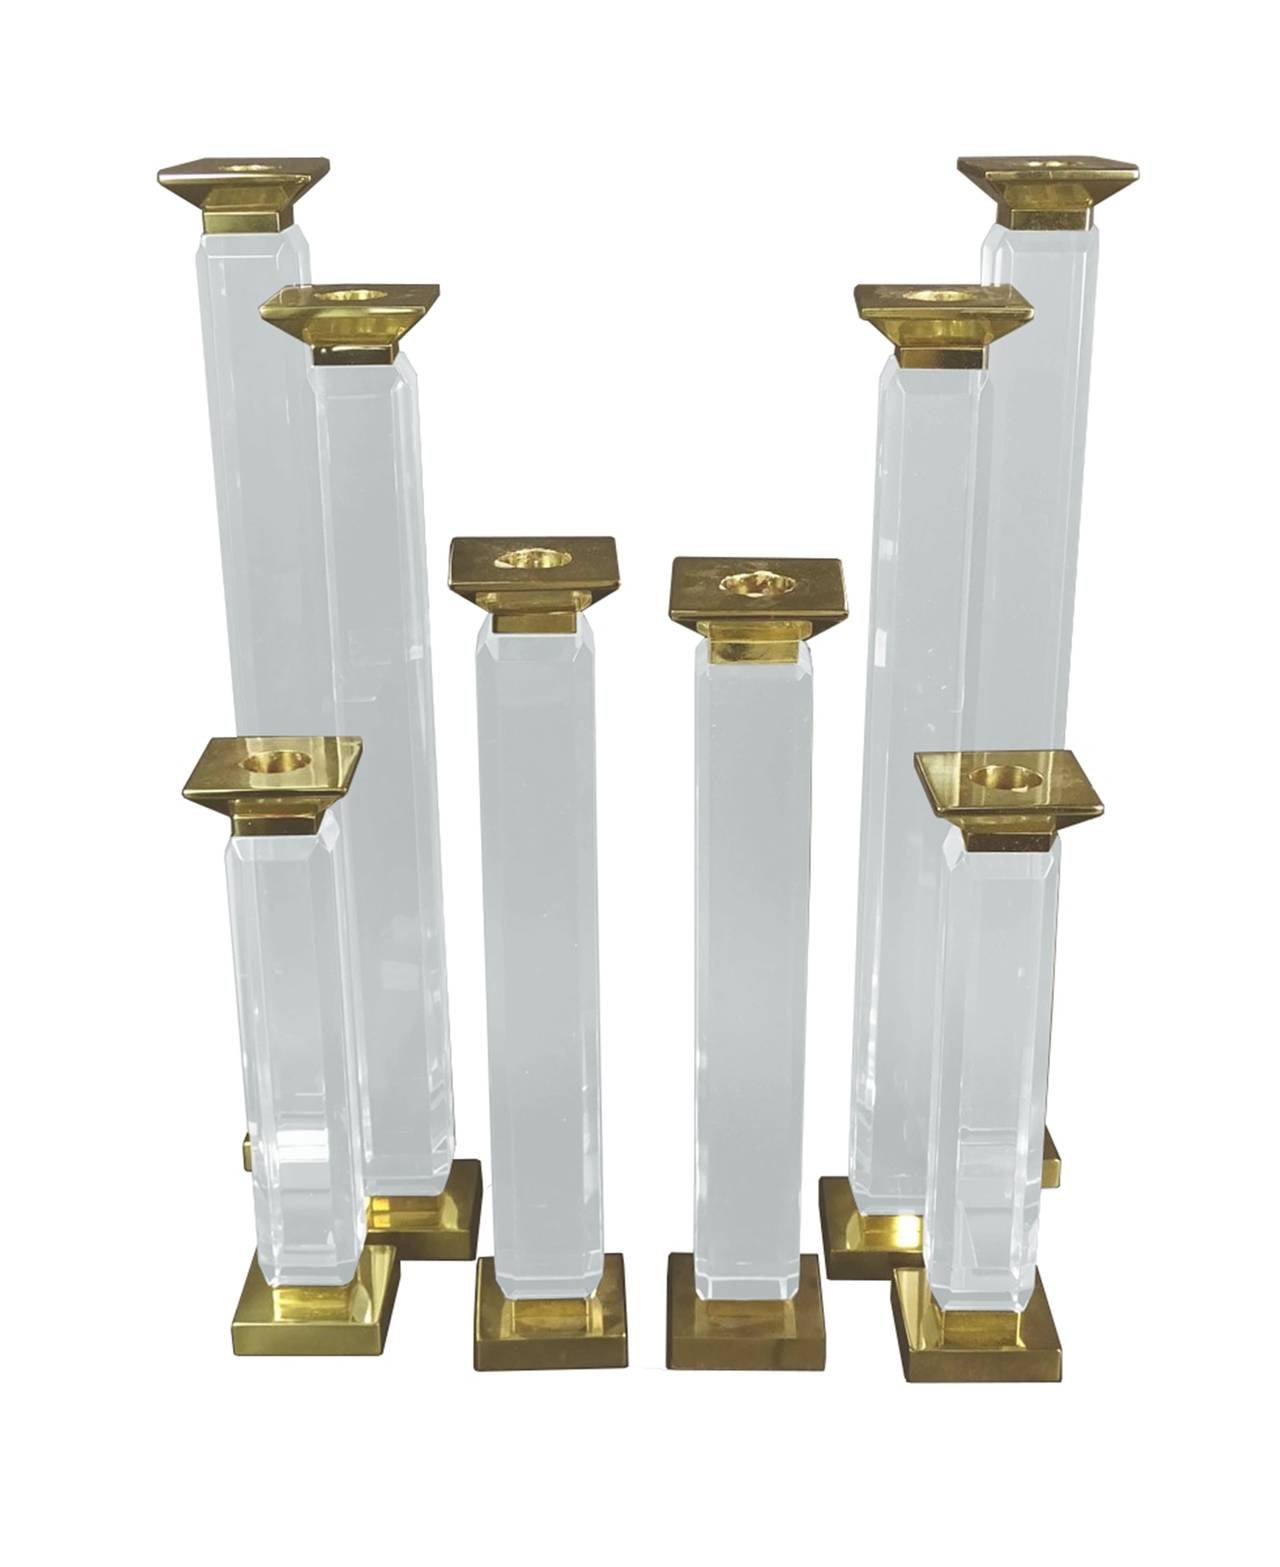 Beautiful set of three of candleholders designed by Charles Hollis Jones in Lucite and solid brass.
The pieces are part of the 